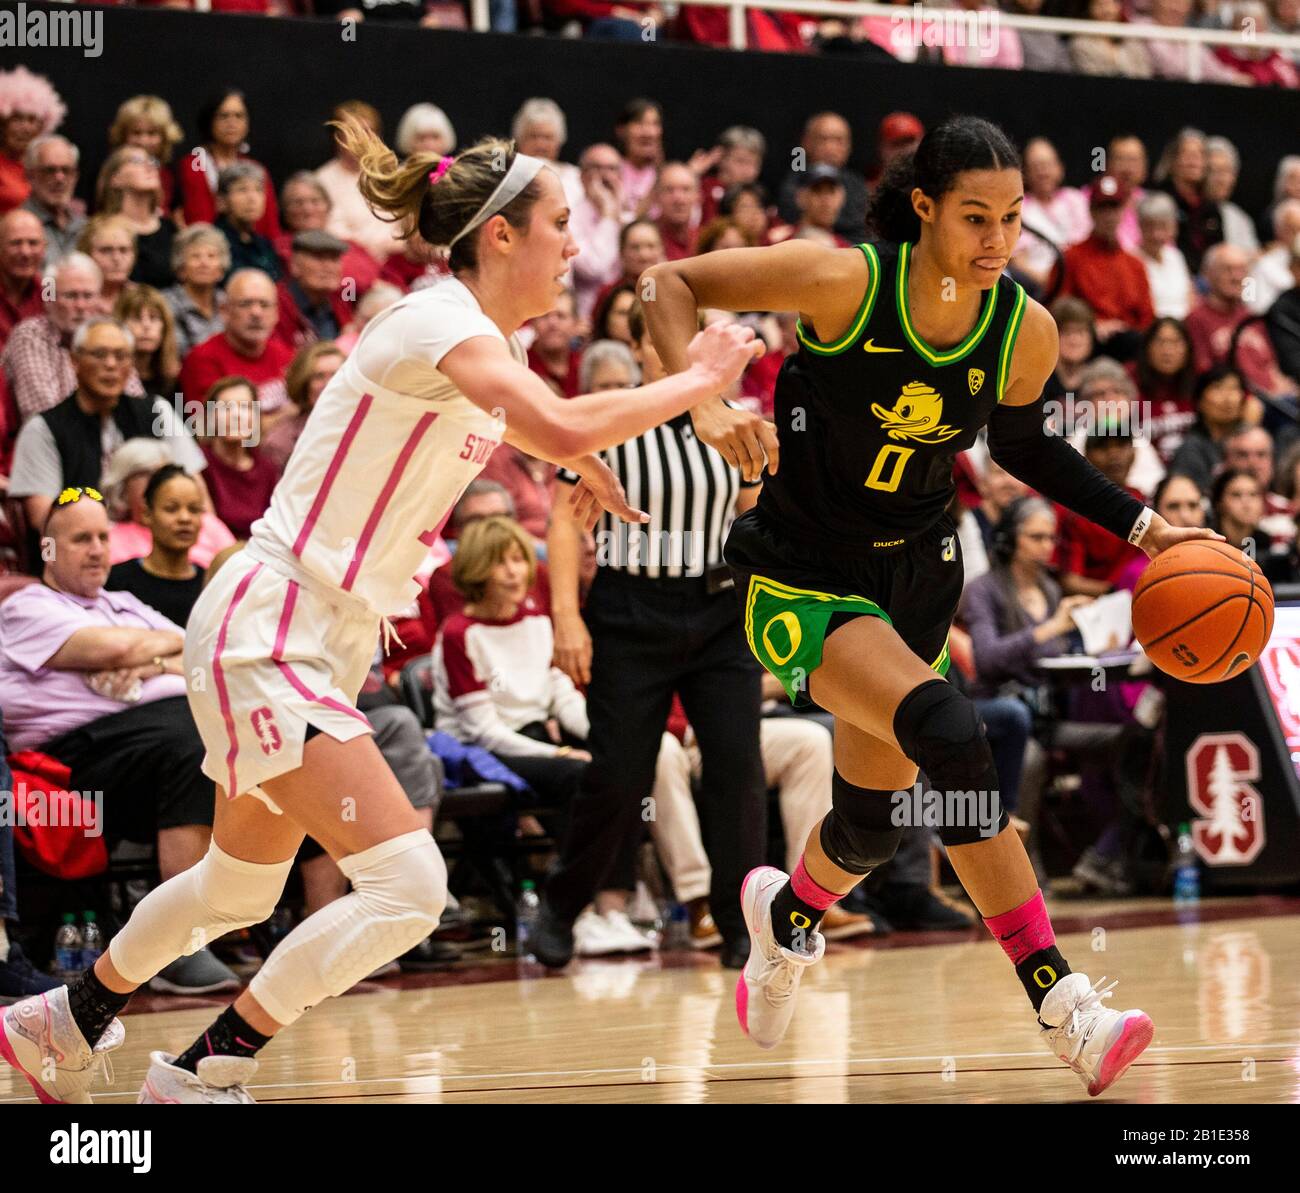 Stanford, CA, USA. 24th Feb, 2020. A. Oregon Ducks forward Satou Sabally (0) drives to the hoop during the NCAA Women's Basketball game between Oregon Ducks and the Stanford Cardinal 74-66 win at Maples Pavilion Stanford, CA. Thurman James /CSM/Alamy Live News Stock Photo